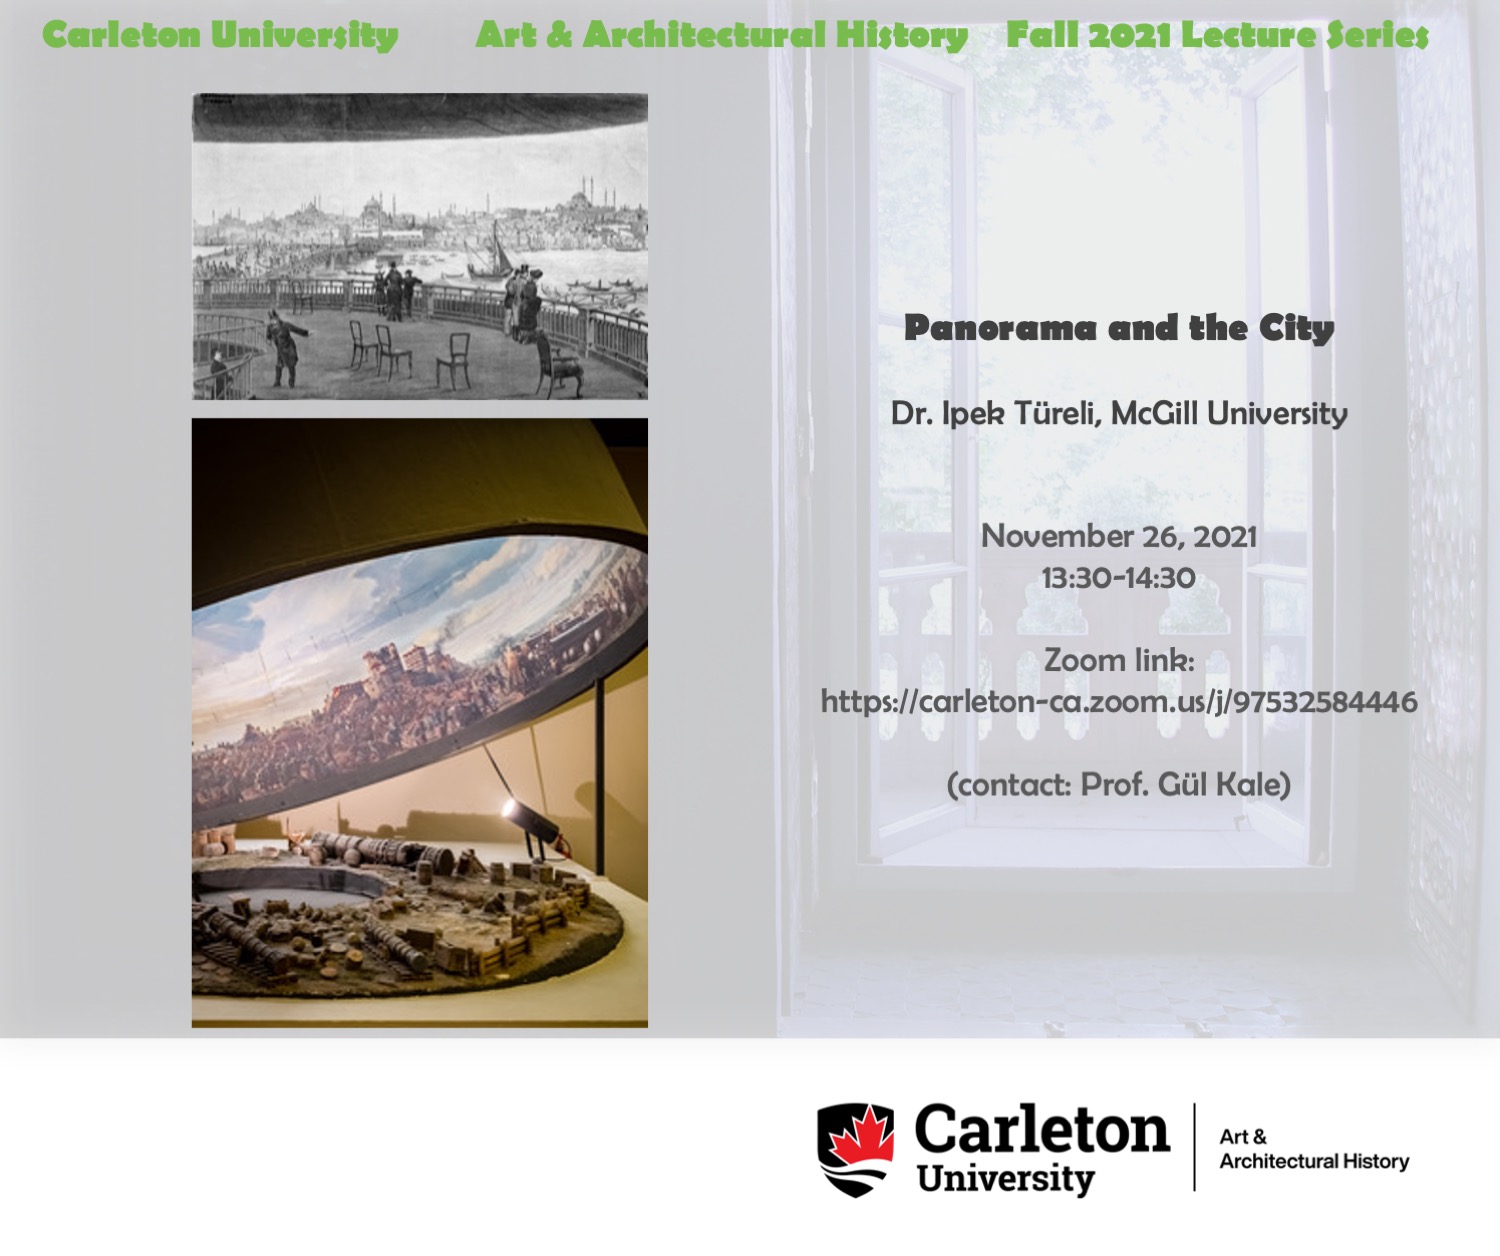 Poster for AHH Lecture Series Event - November 26, 2